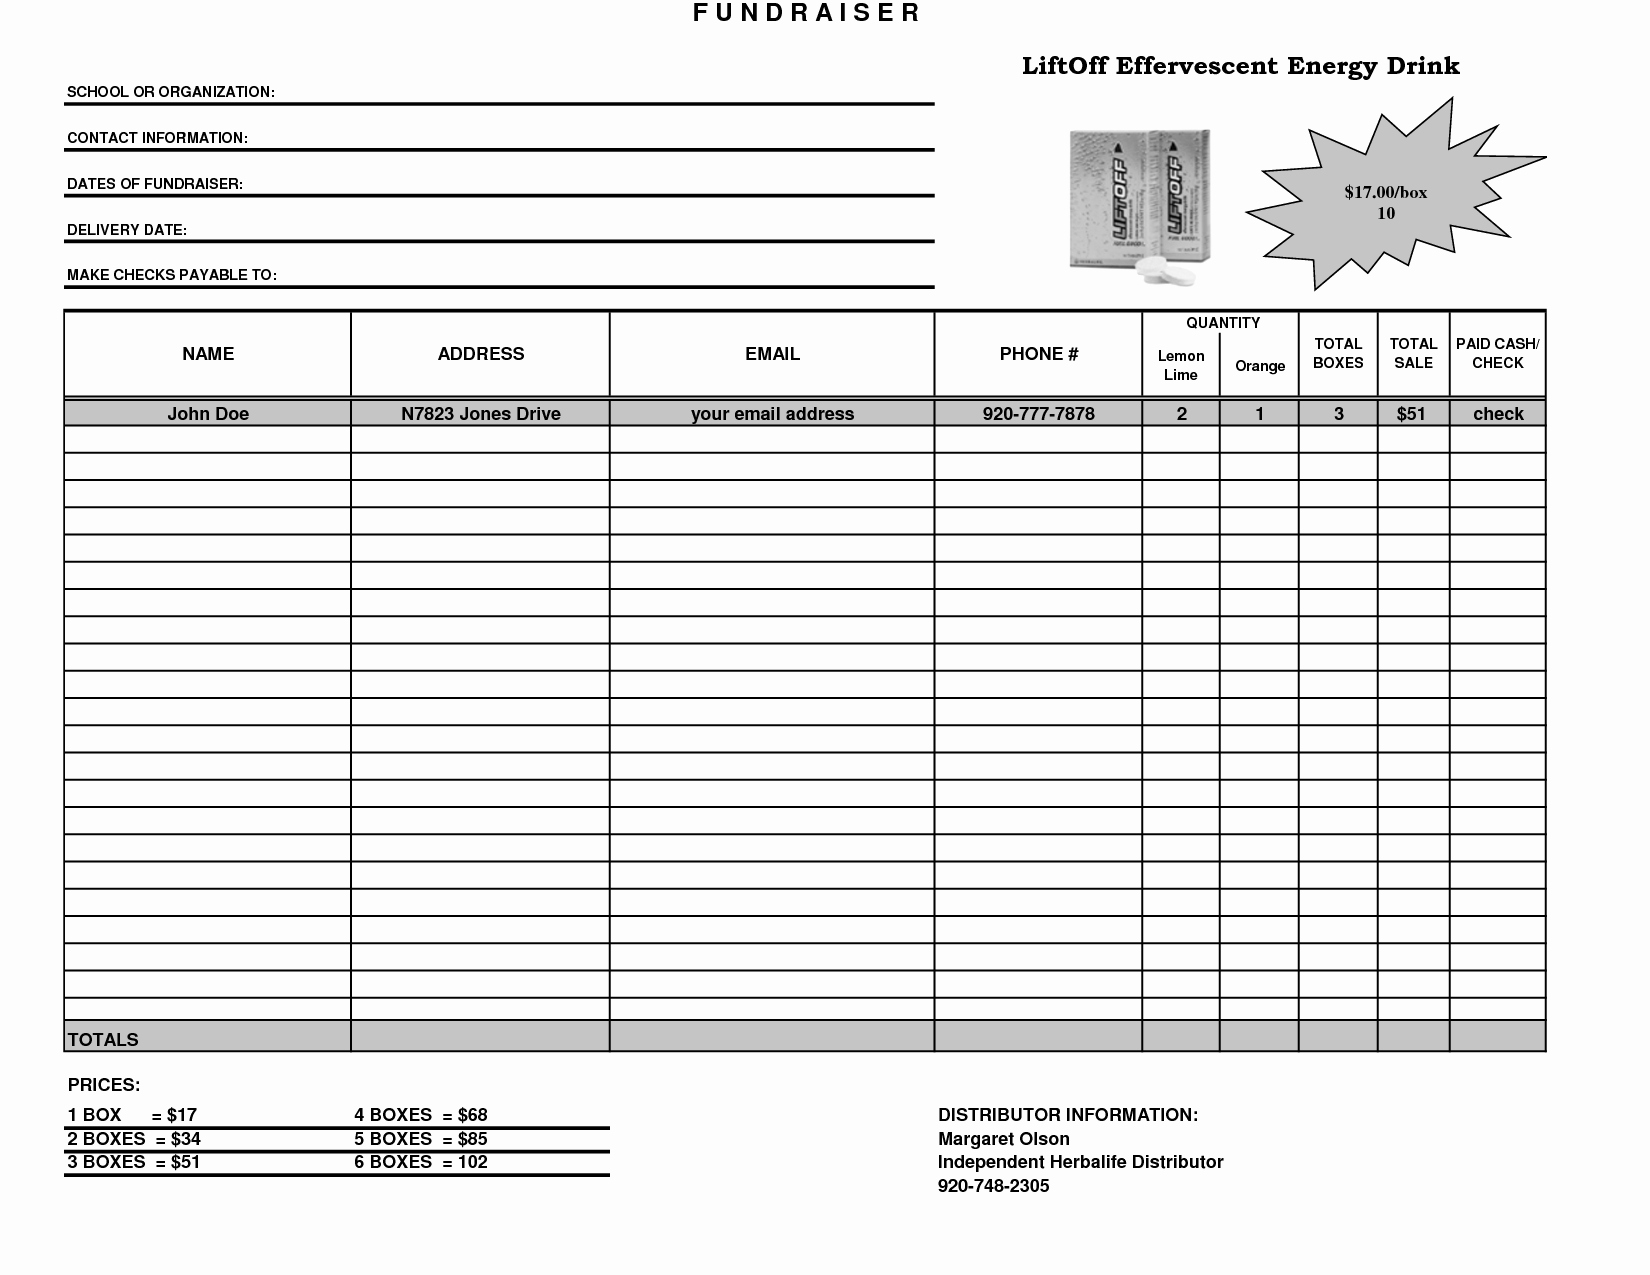 Fundraiser order form Template Word Beautiful Fundraiser Template Excel Fundraiser order form Template